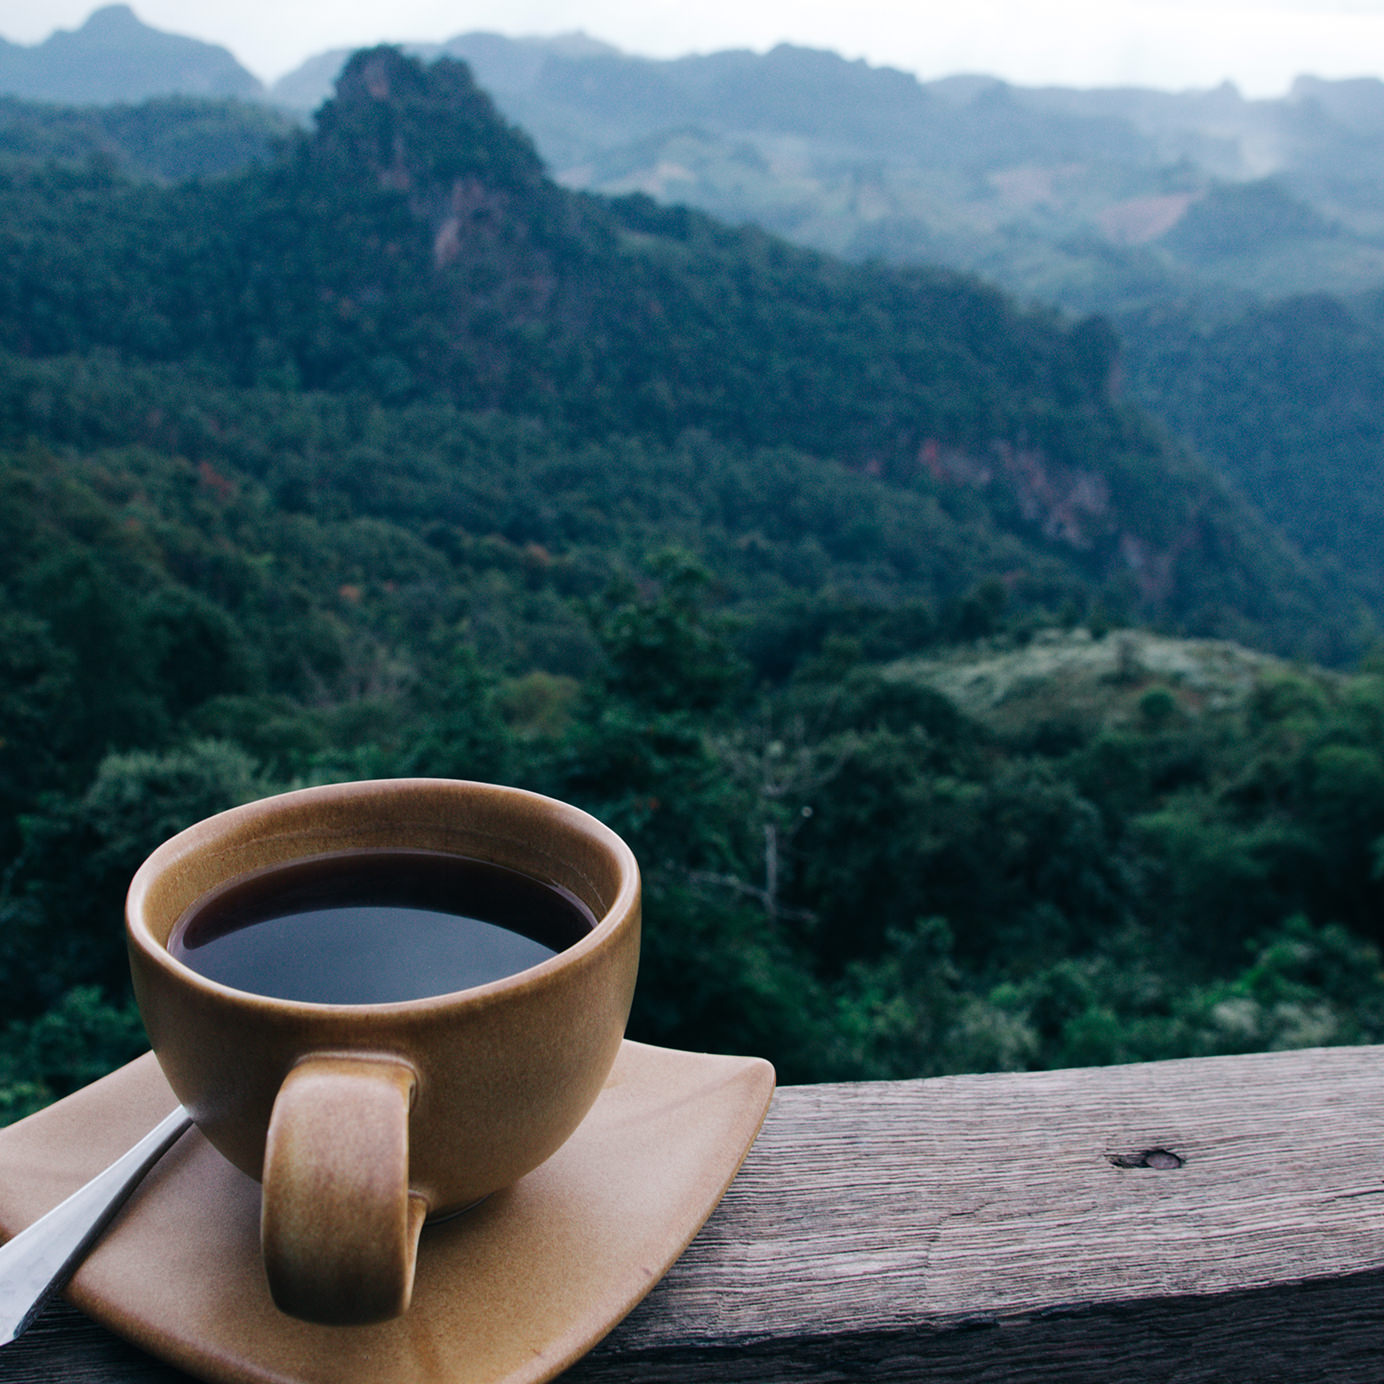 Does Coffee Have Terroir?